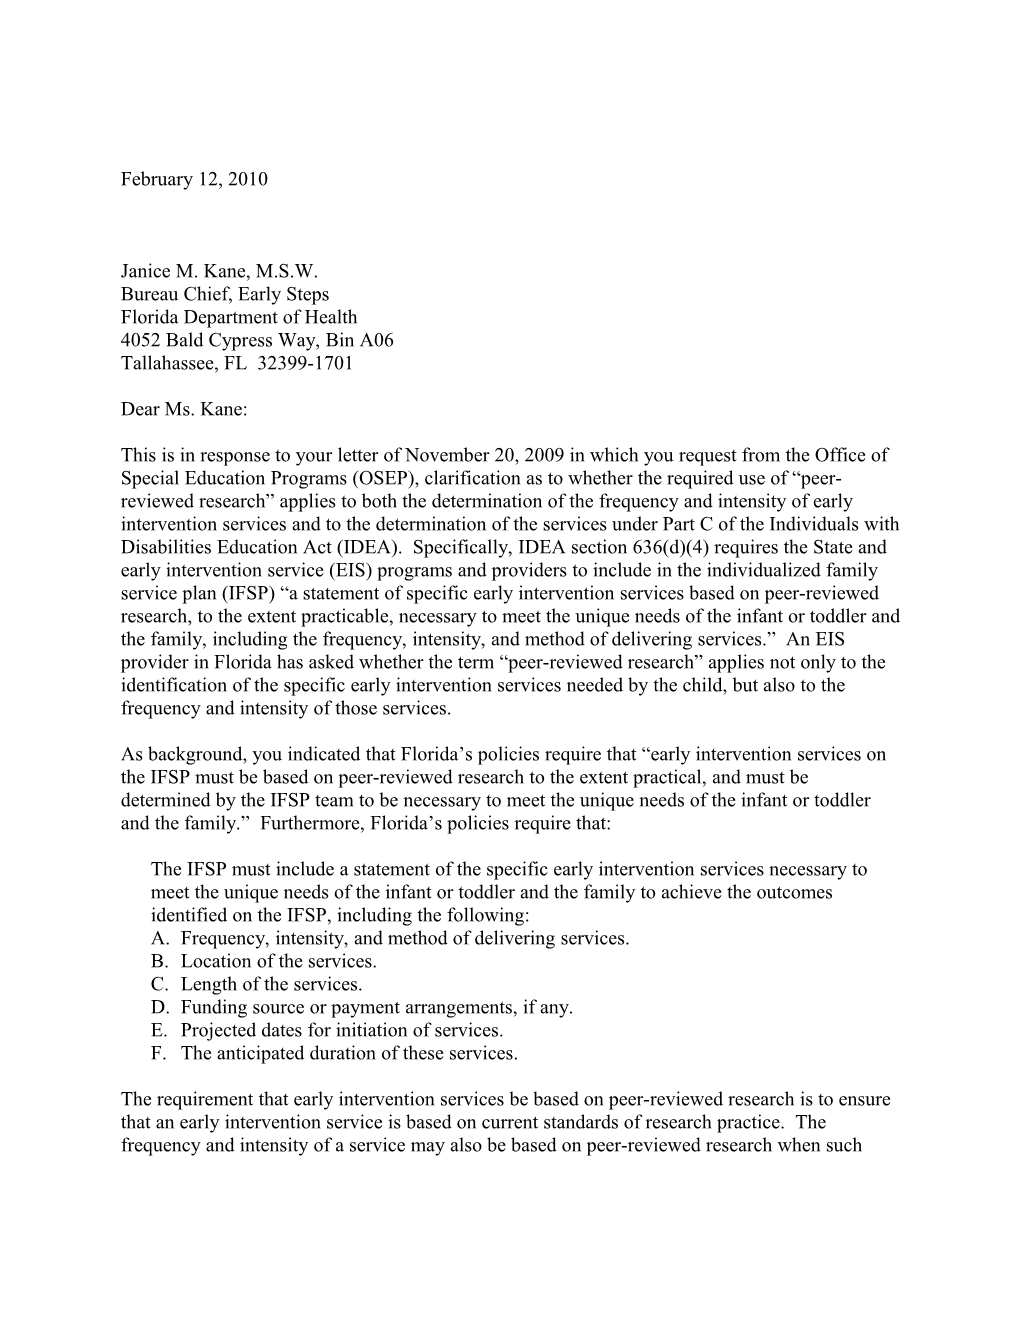 Kane Letter Dated 02/12/10 Re: Individualized Family Service Plan (MS Word)